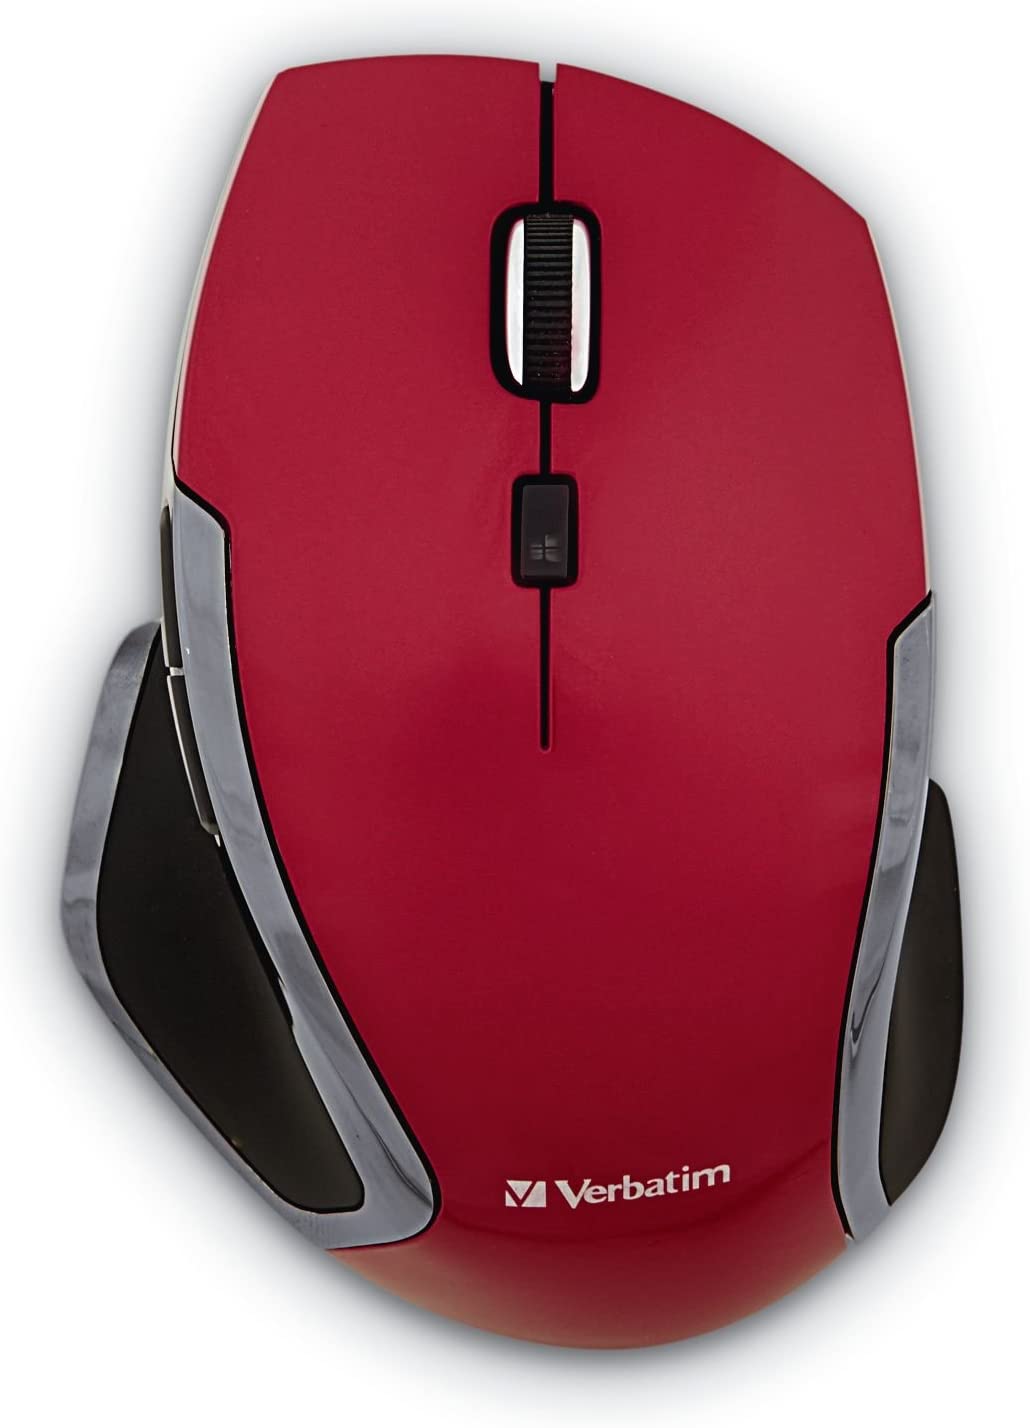 Verbatim 2.4G Wireless 6-Button LED Ergonomic Deluxe Mouse - Computer Mouse with Nano Receiver for Mac and PC – Red